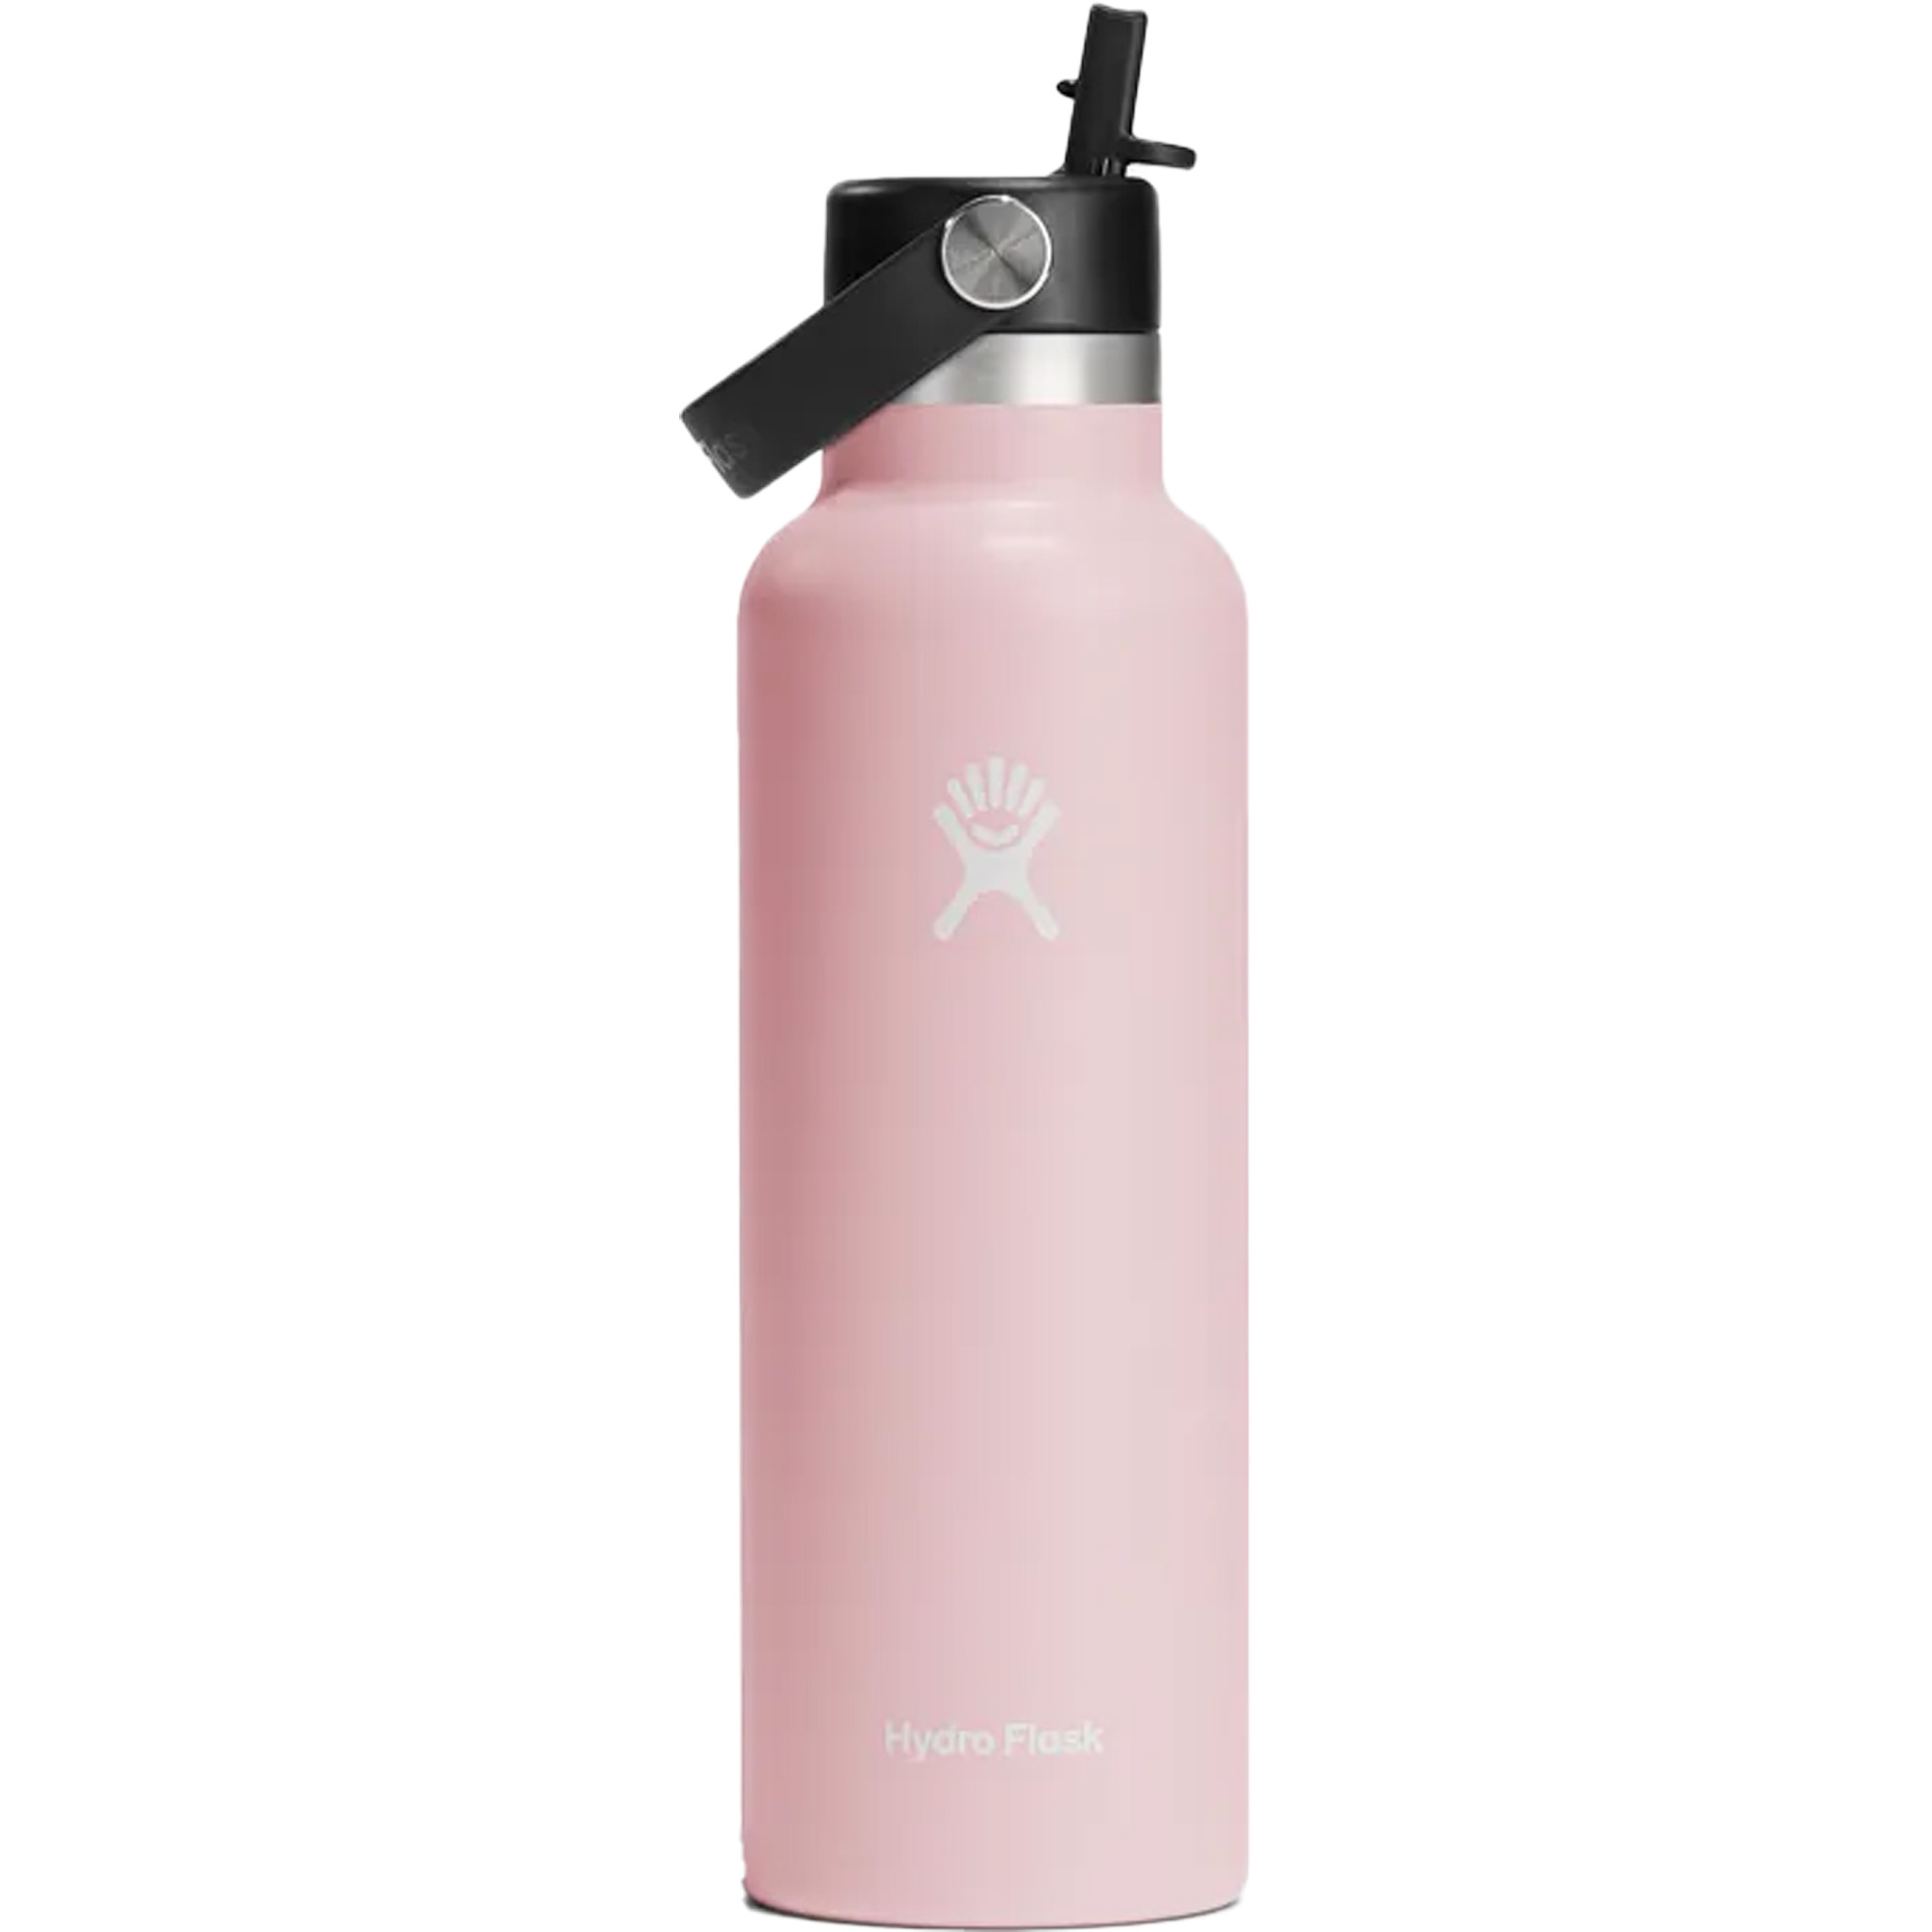 Hydro Flask 21oz Standard Mouth With Flex Straw Cap Water Bottle